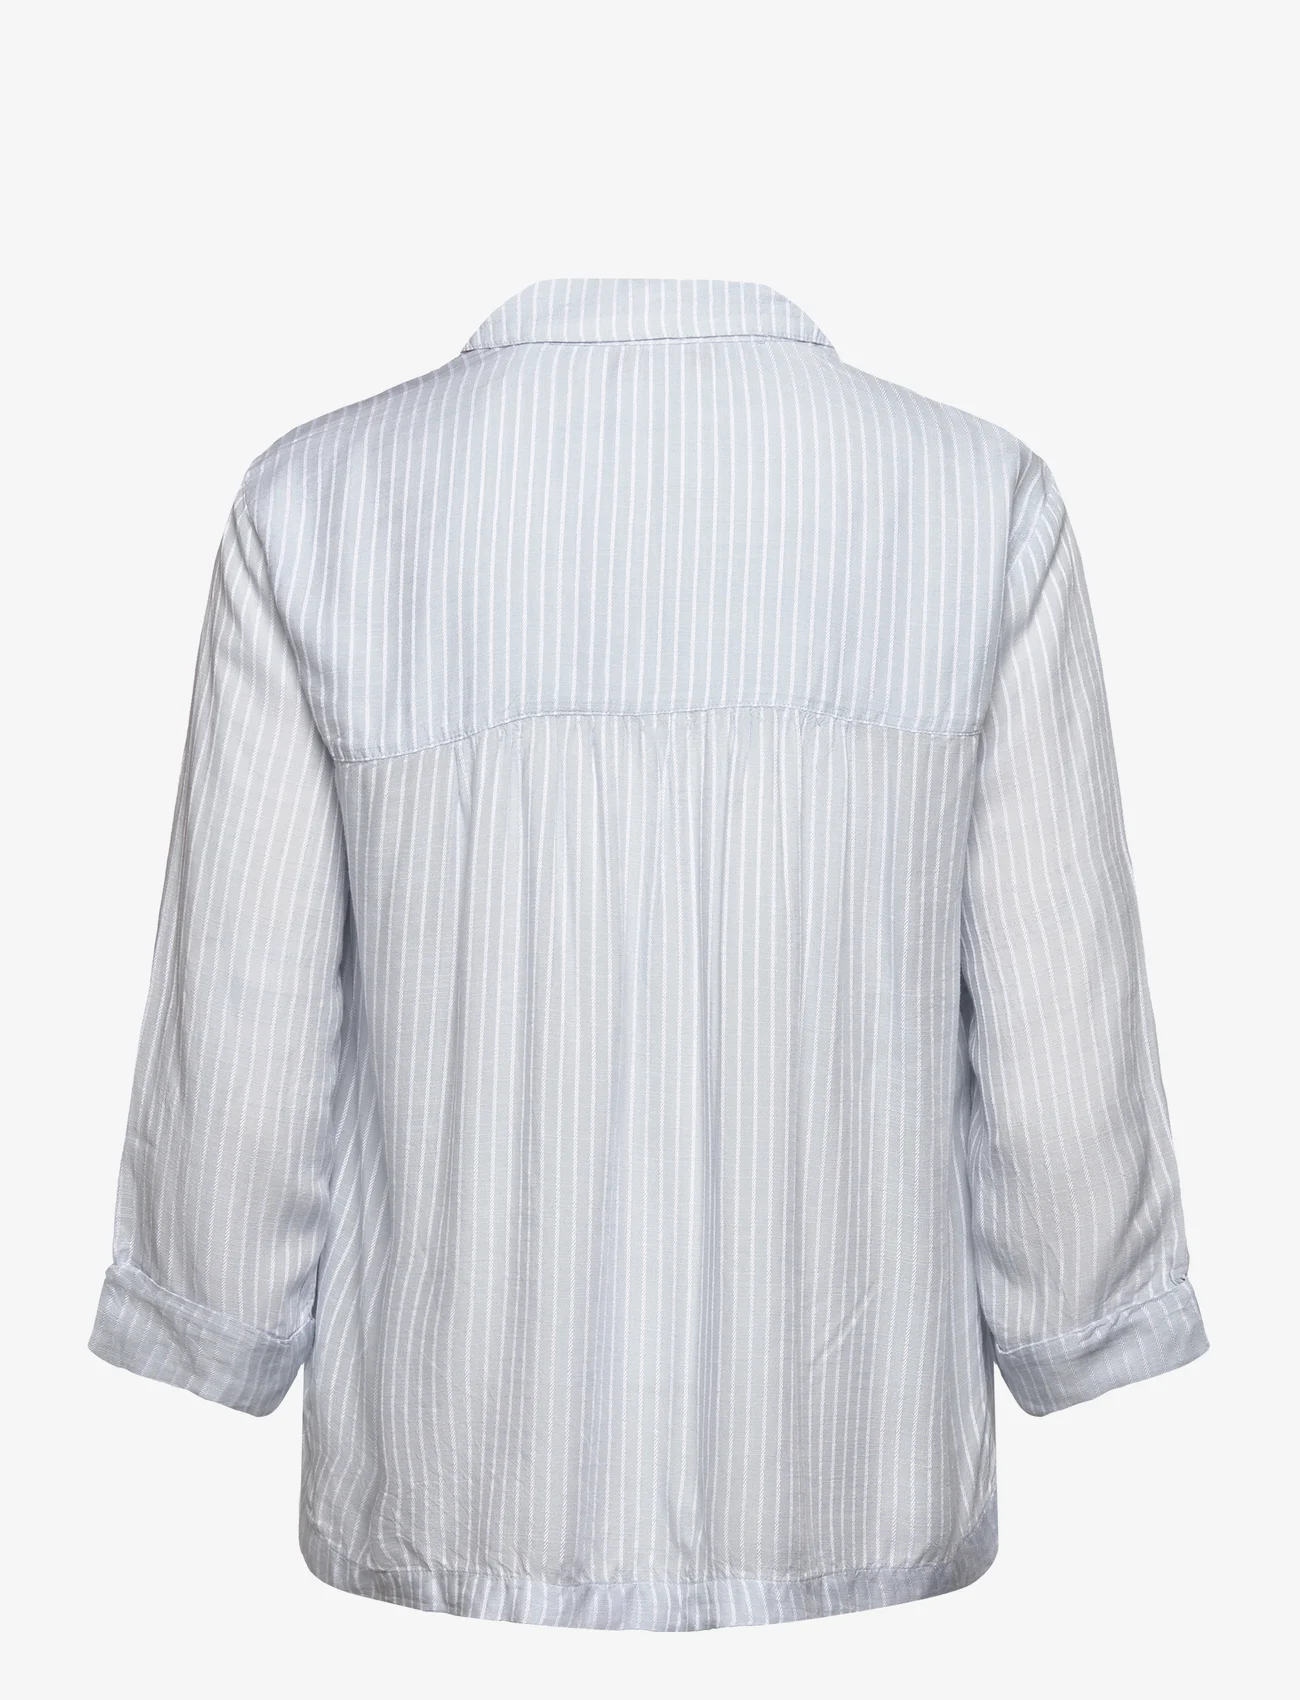 Esprit Casual - Blouses woven - long-sleeved shirts - light blue - 1